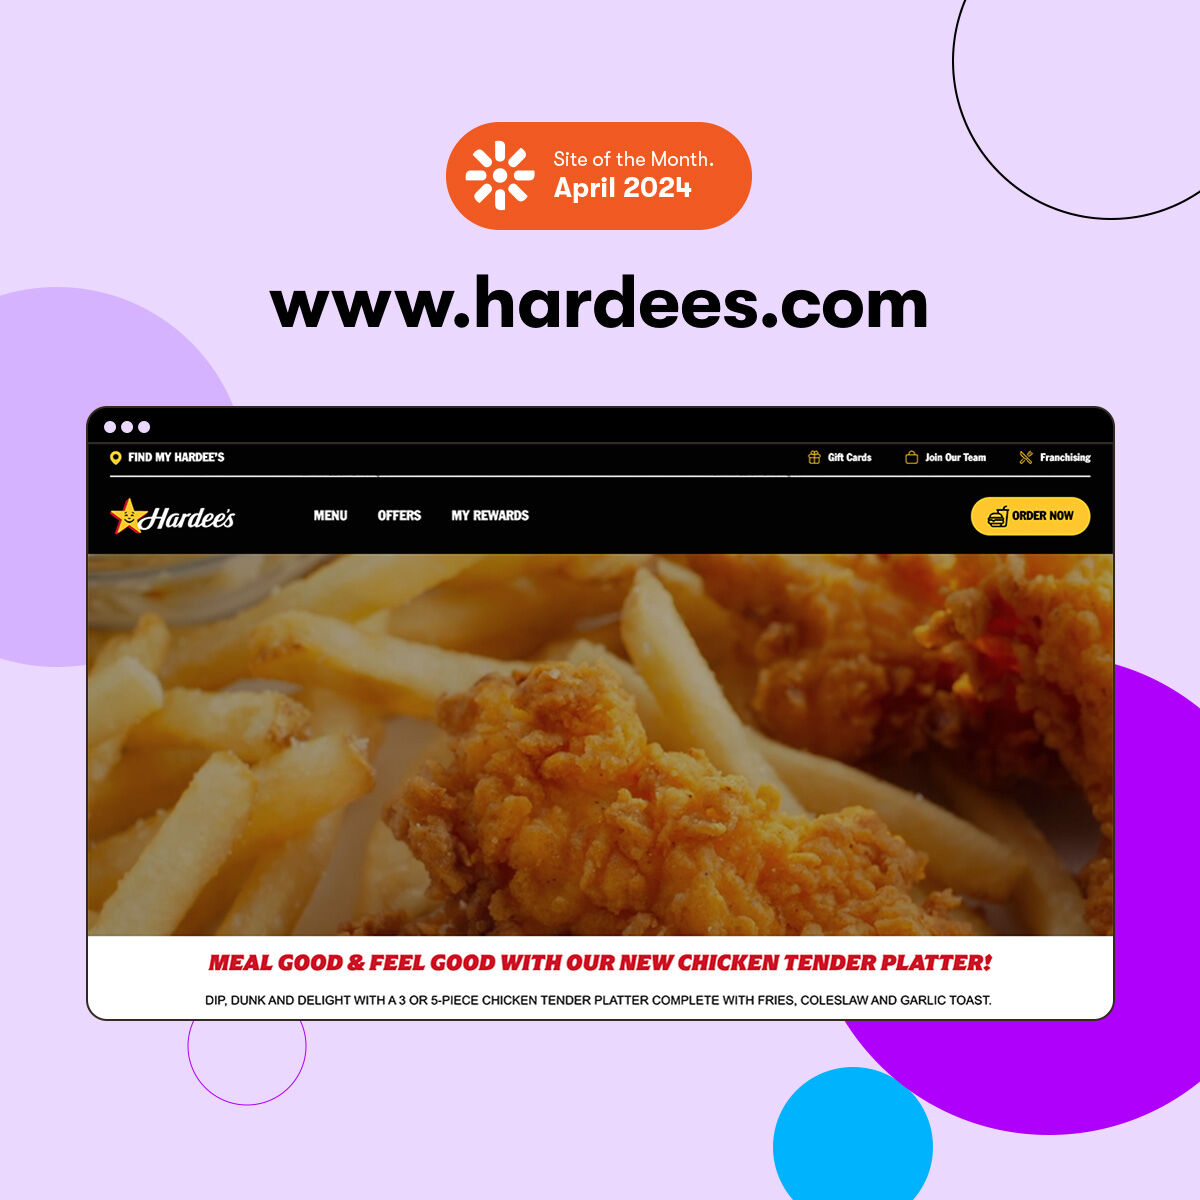 🍔 Site of the Month: @Hardees, deliciously revamped through the culinary collaboration of CKE Restaurants and Sagepath 

Sink your teeth into all our Site of the Month winners 👉 link.kentico.net/4a5xPqA

#SiteOfTheMonth #digitaltransformation #DXP #CMS